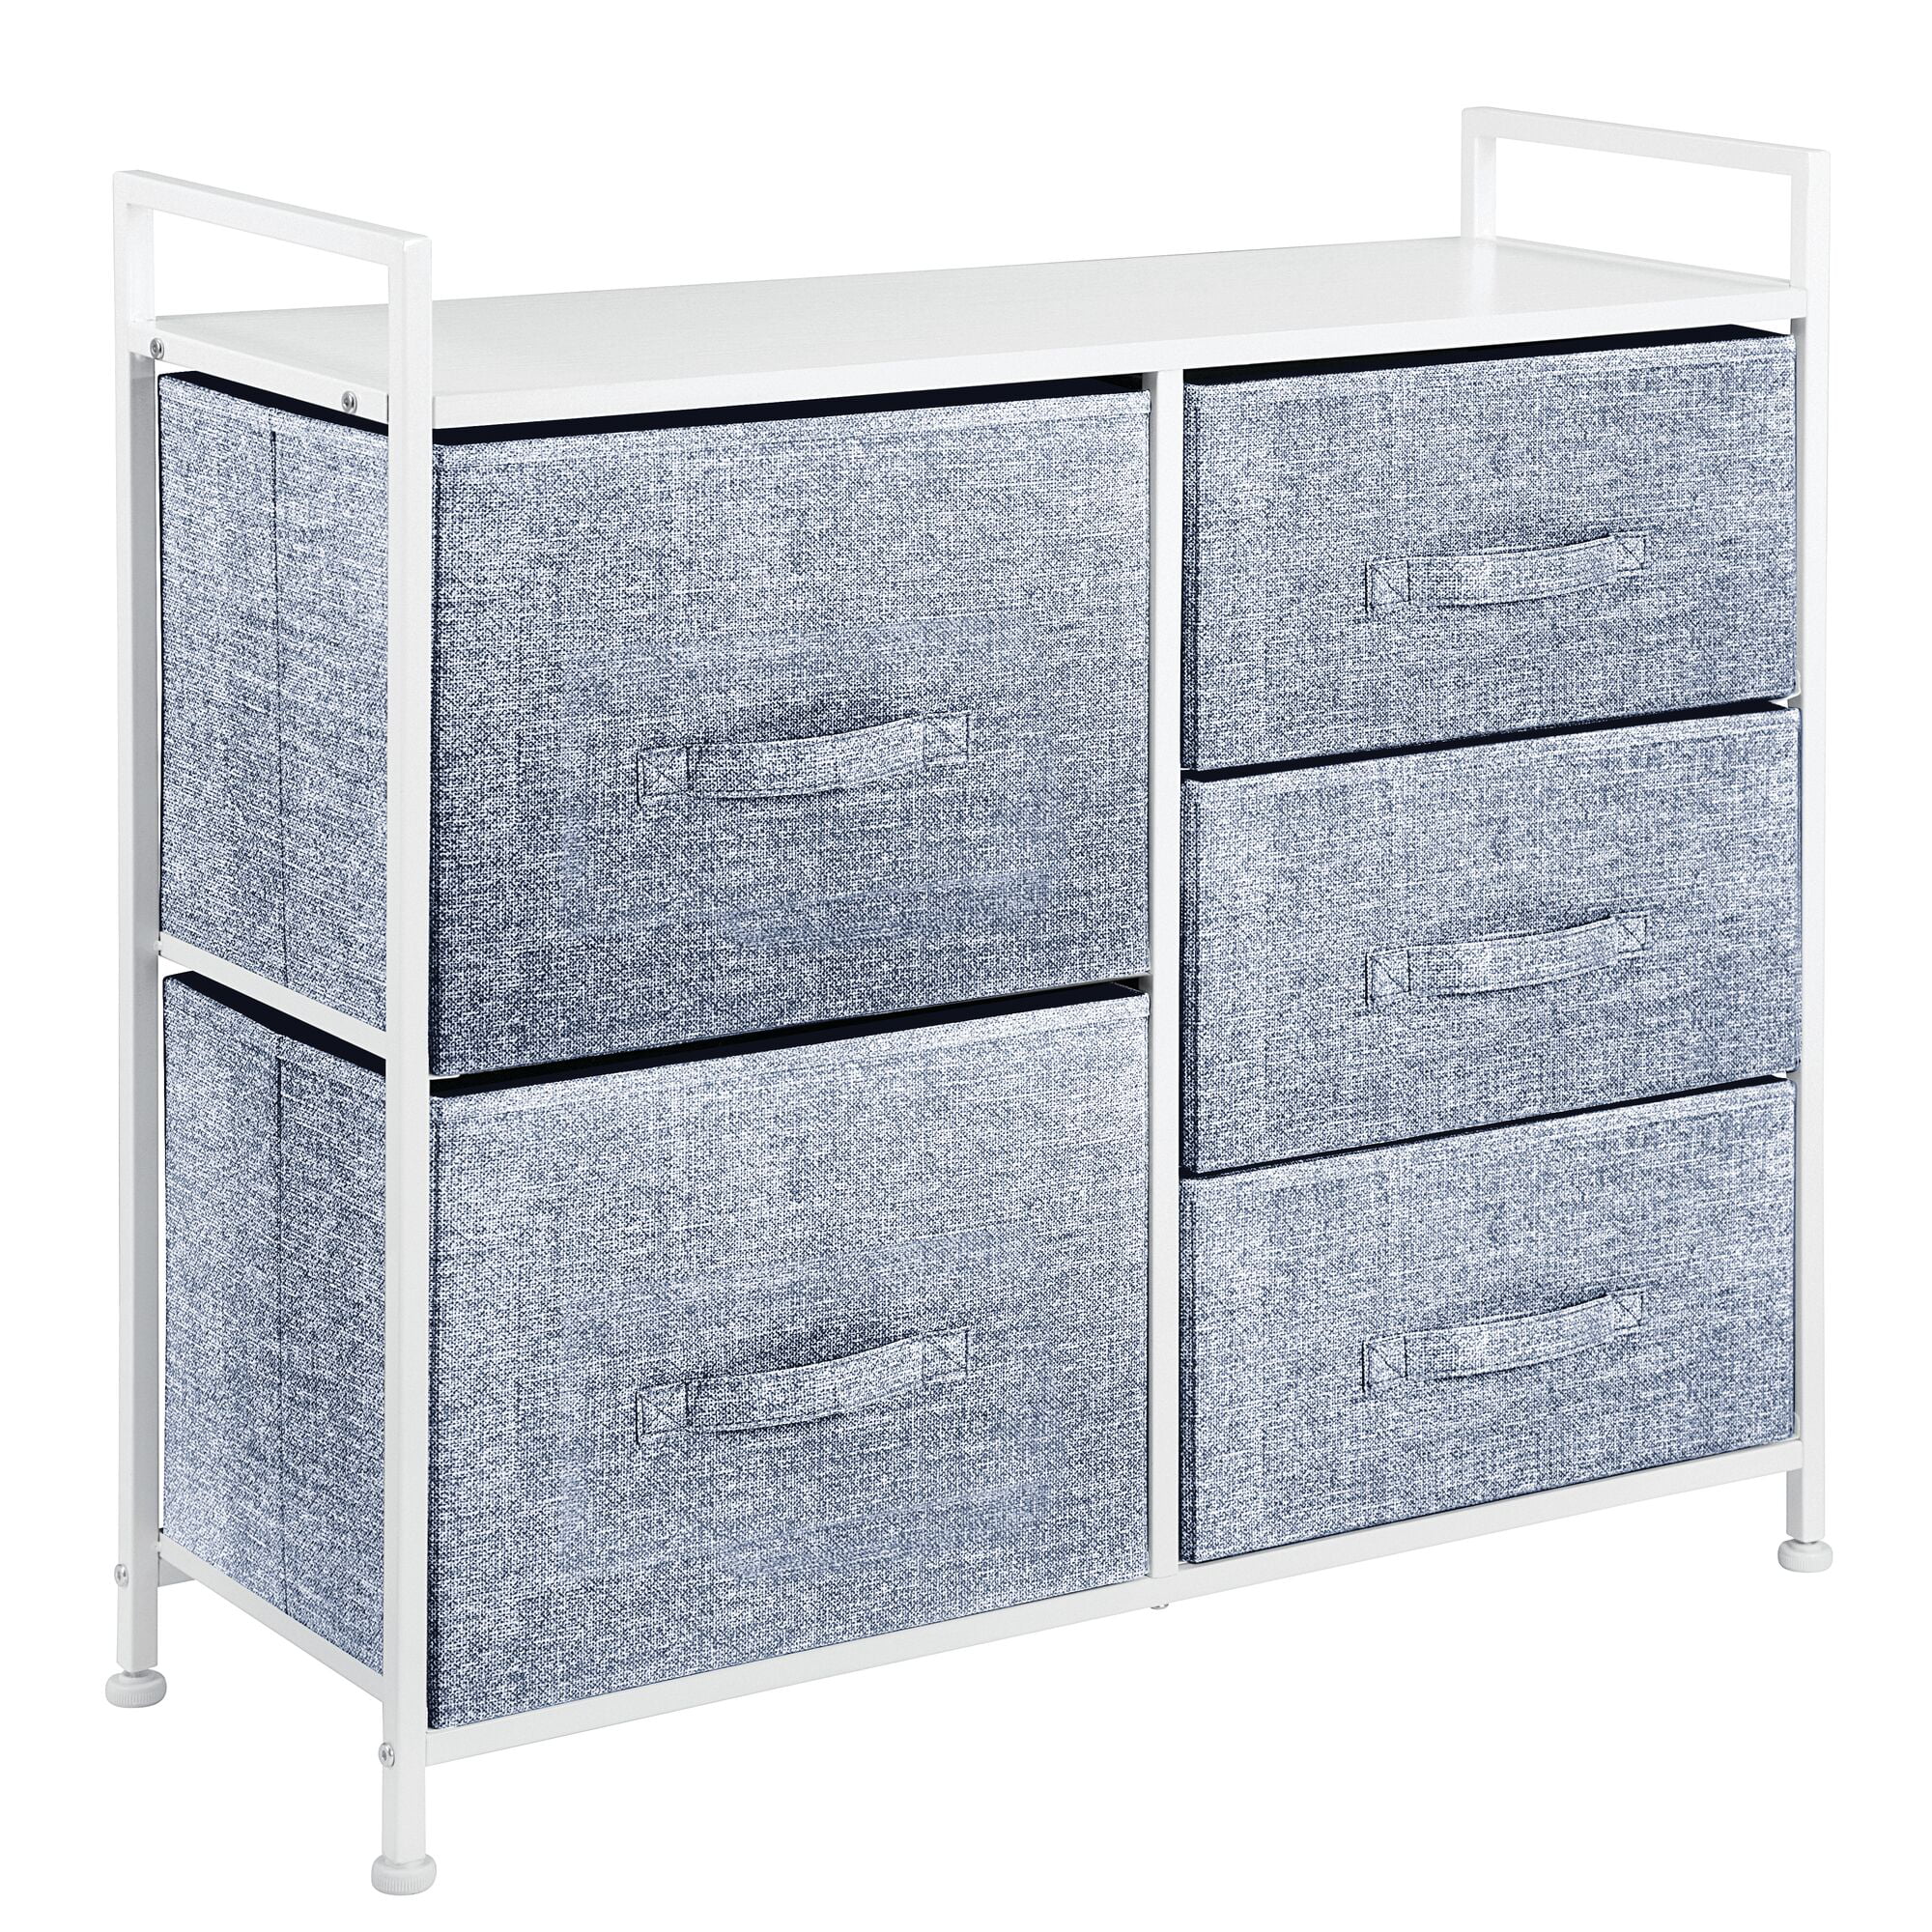 Easy Pull Fabric Bins Organizer Unit for Child/Kids Bedroom or Nursery Sturdy Steel Frame mDesign Extra Wide Dresser Storage Tower Gray/White Wood Top Textured Print 5 Drawers 